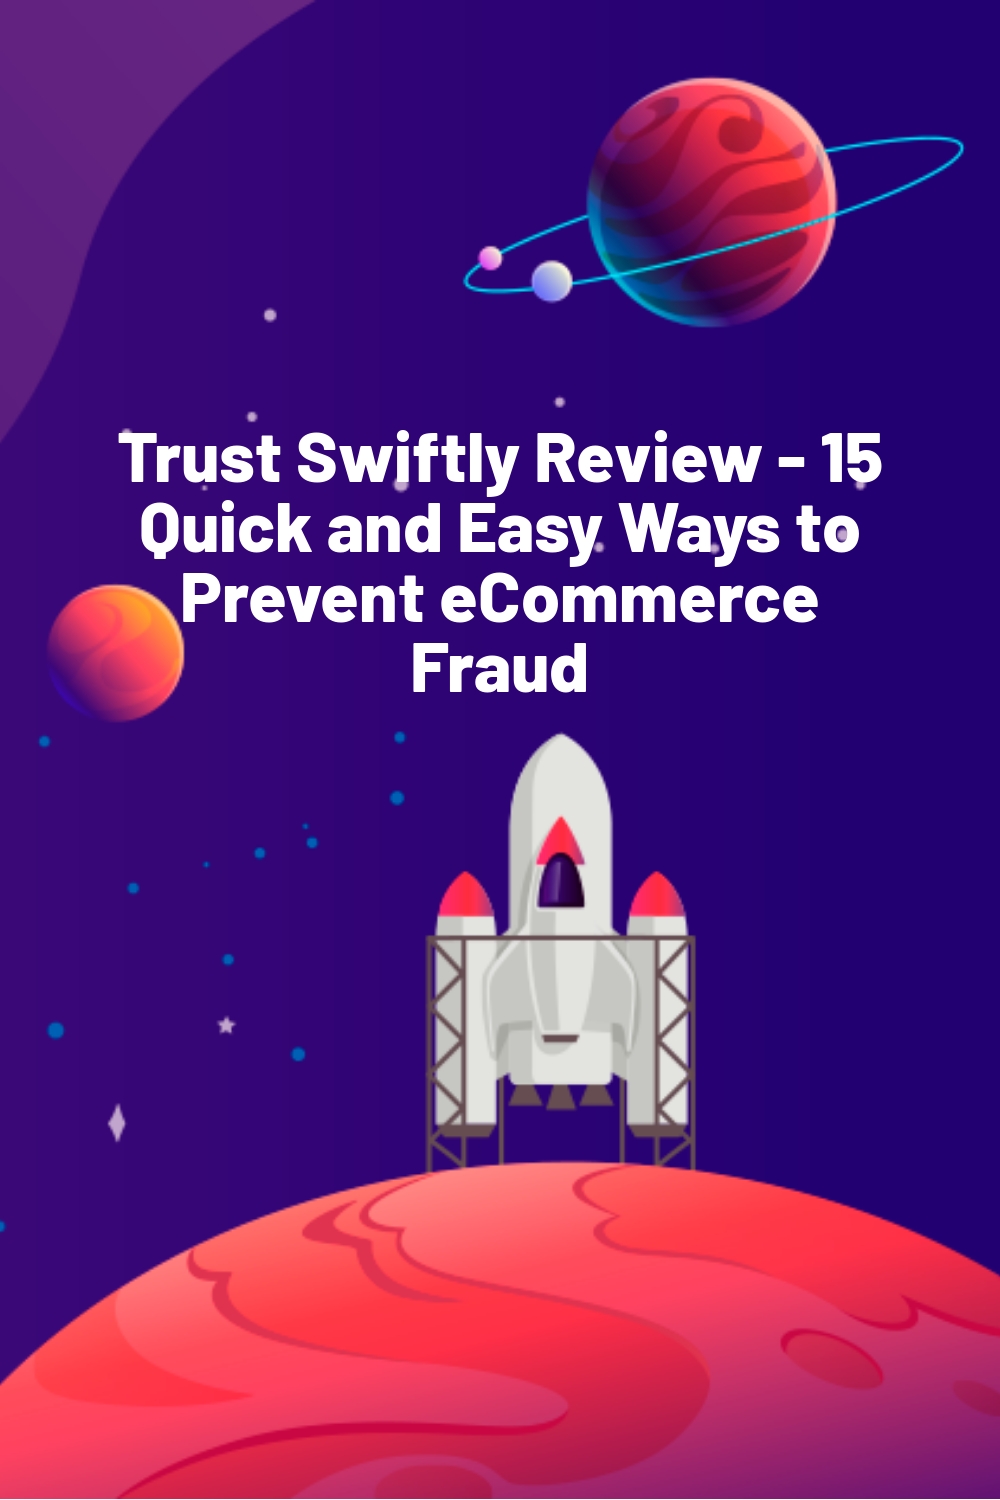 Trust Swiftly Review – 15 Quick and Easy Ways to Prevent eCommerce Fraud